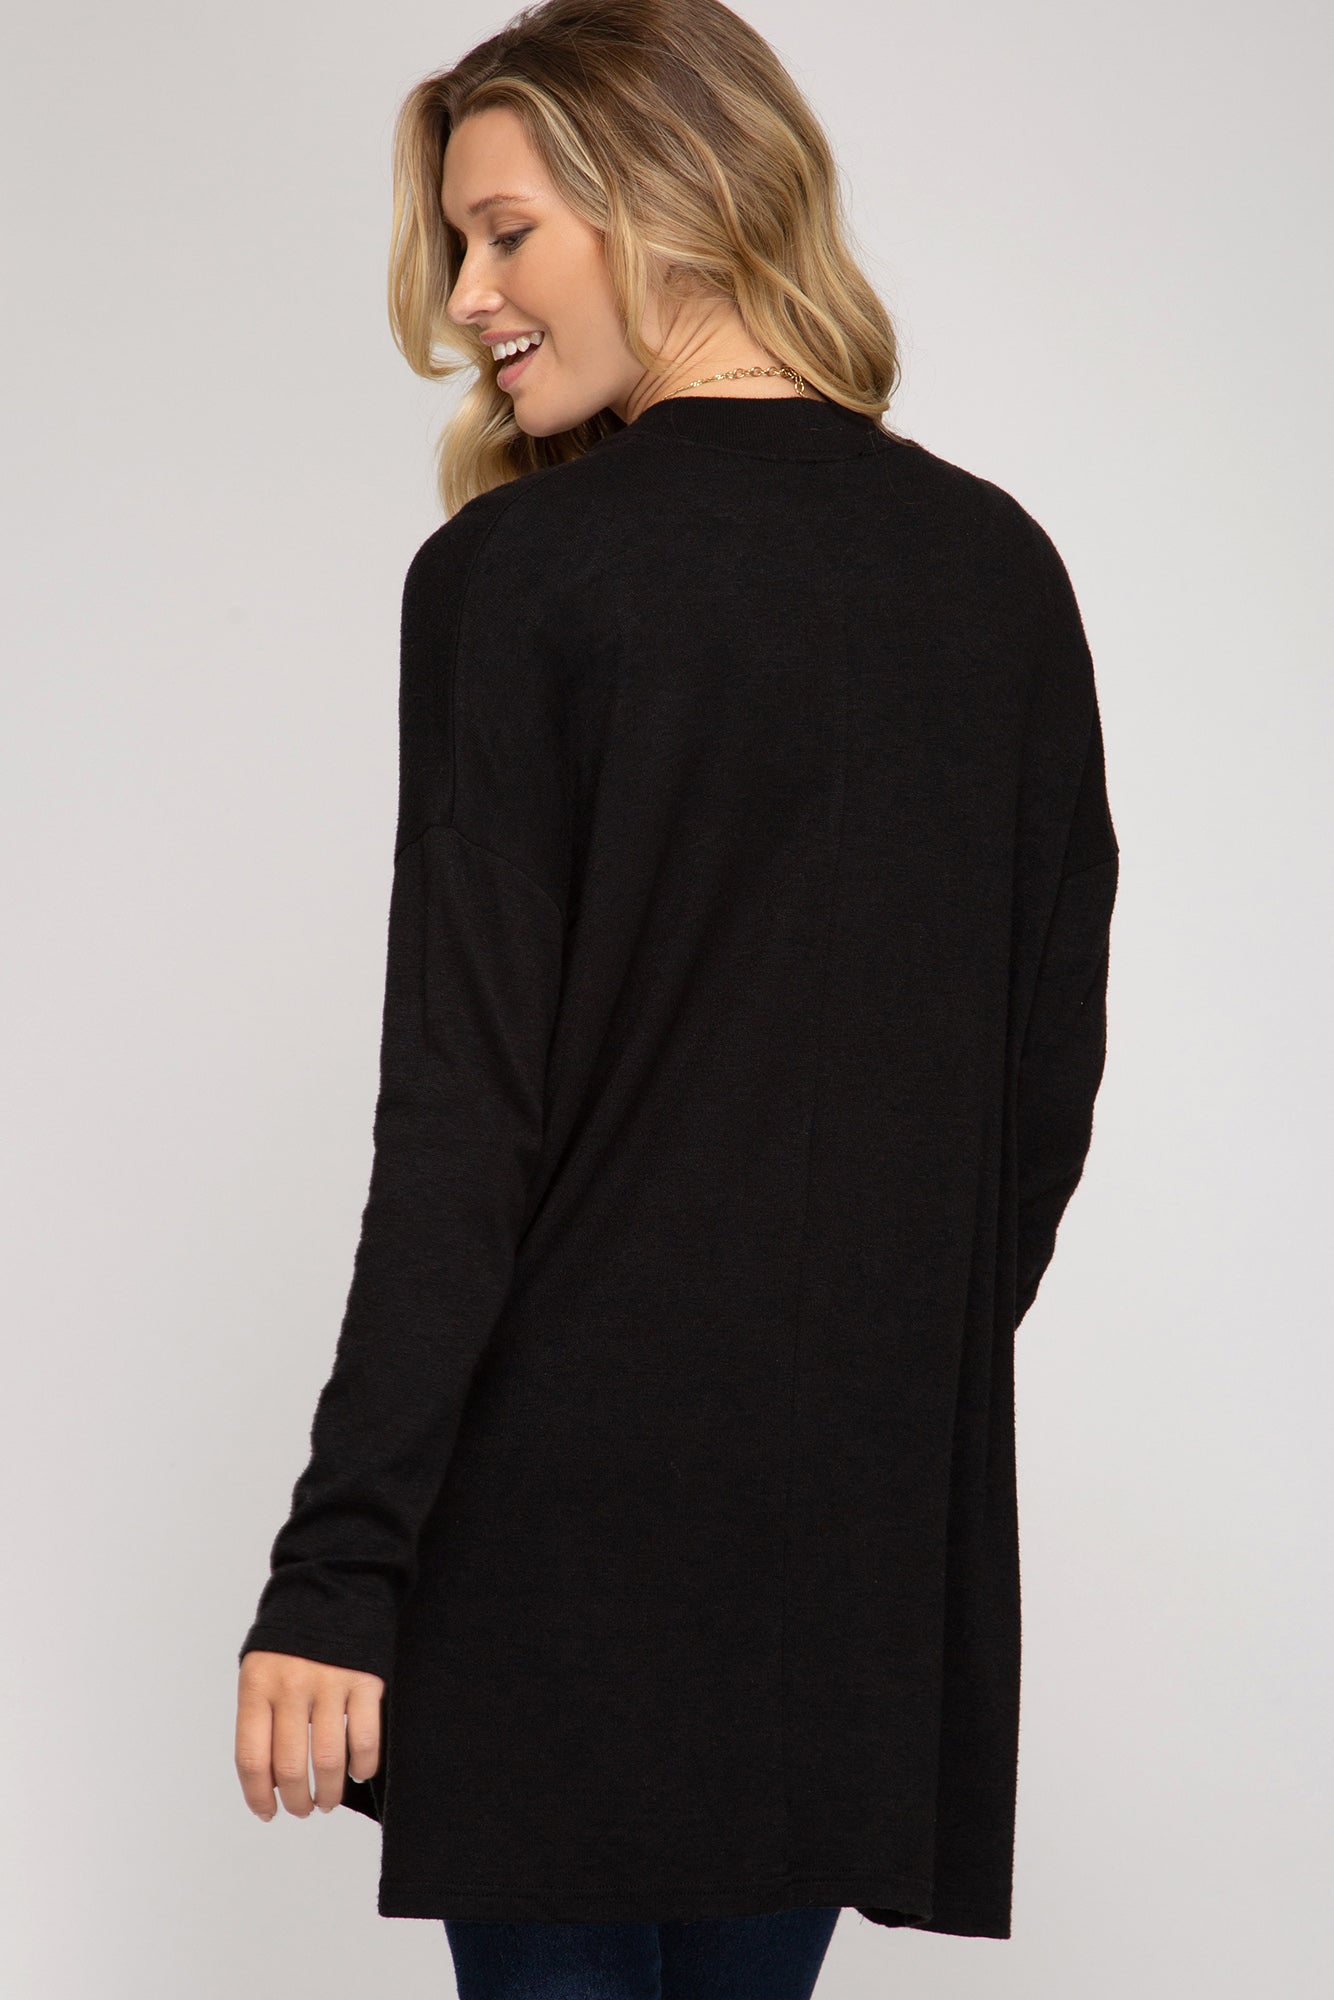 Everyday Cozy Cardigan with Pockets in Black